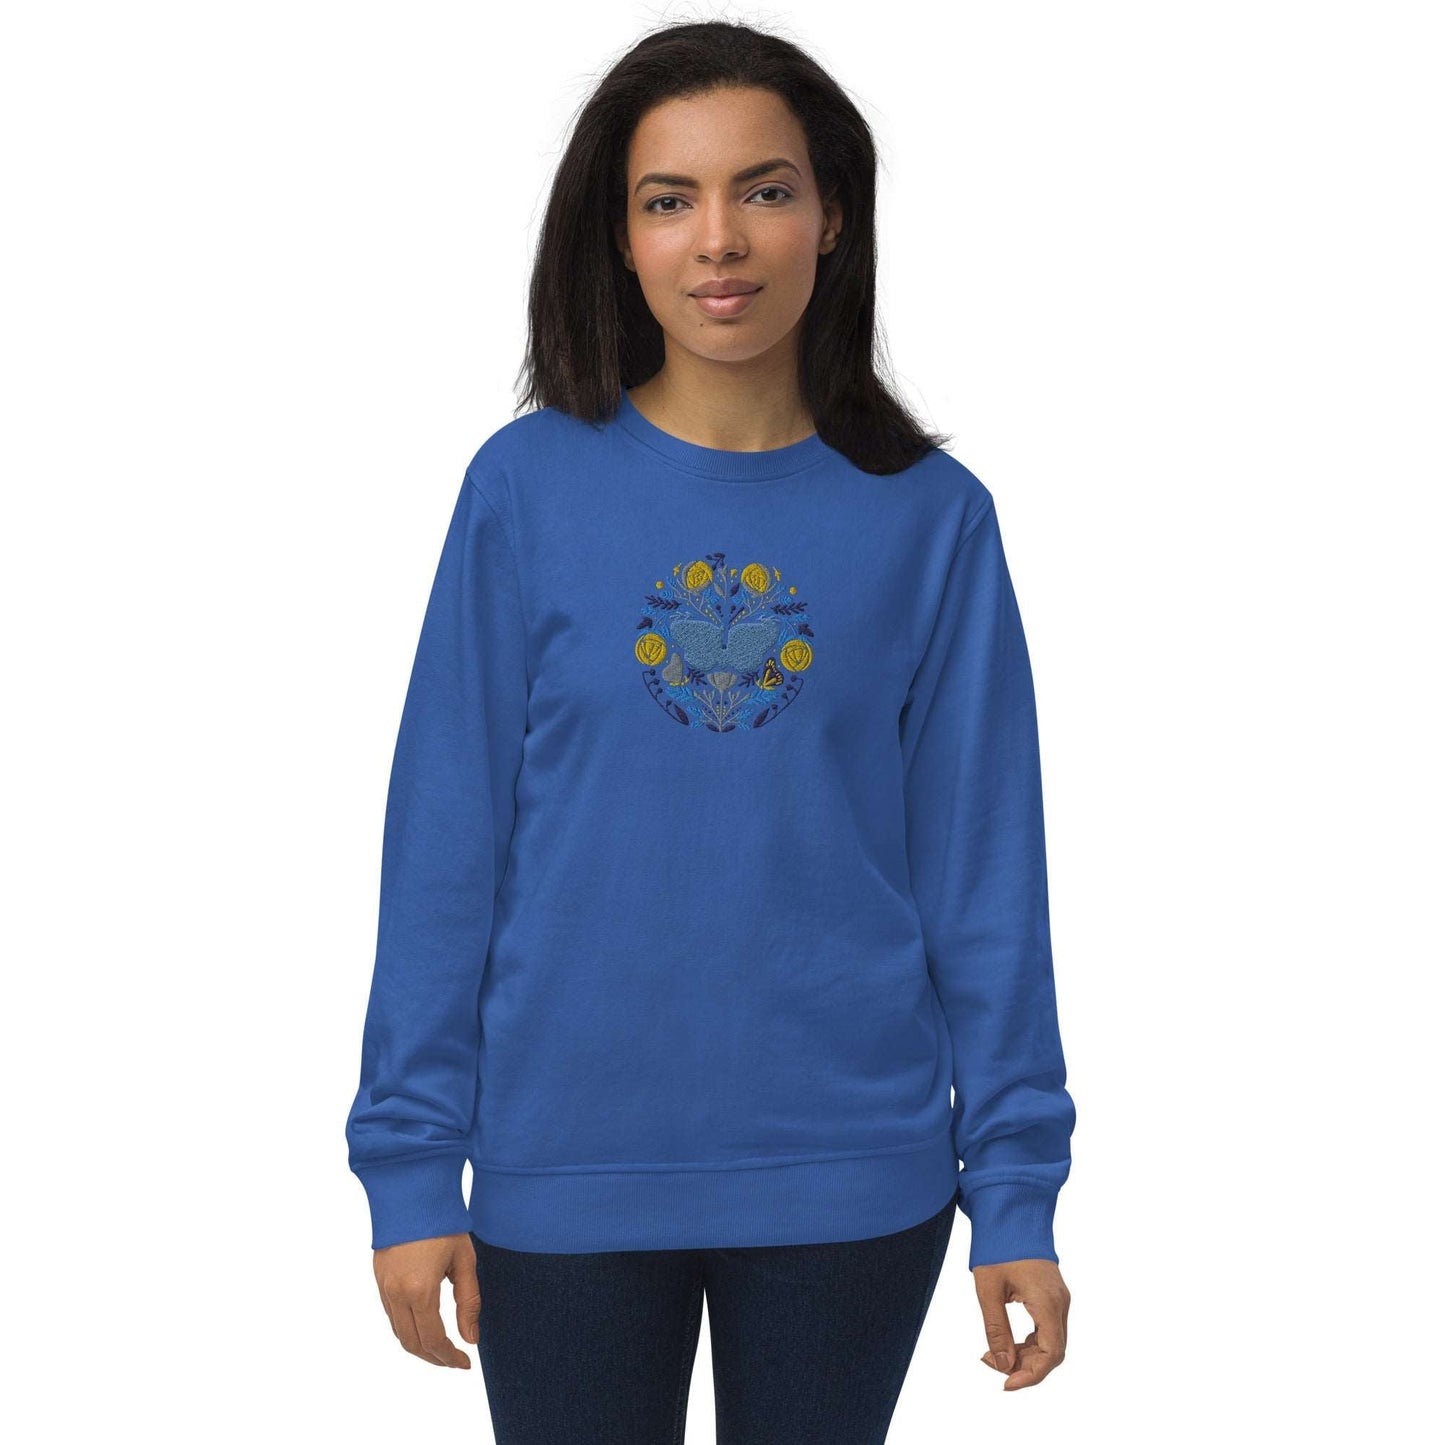 Blue Butterfly - Unisex organic sweatshirt with large chest embroidery - Long Sleeve- Print N Stuff - [designed in Turku FInland]